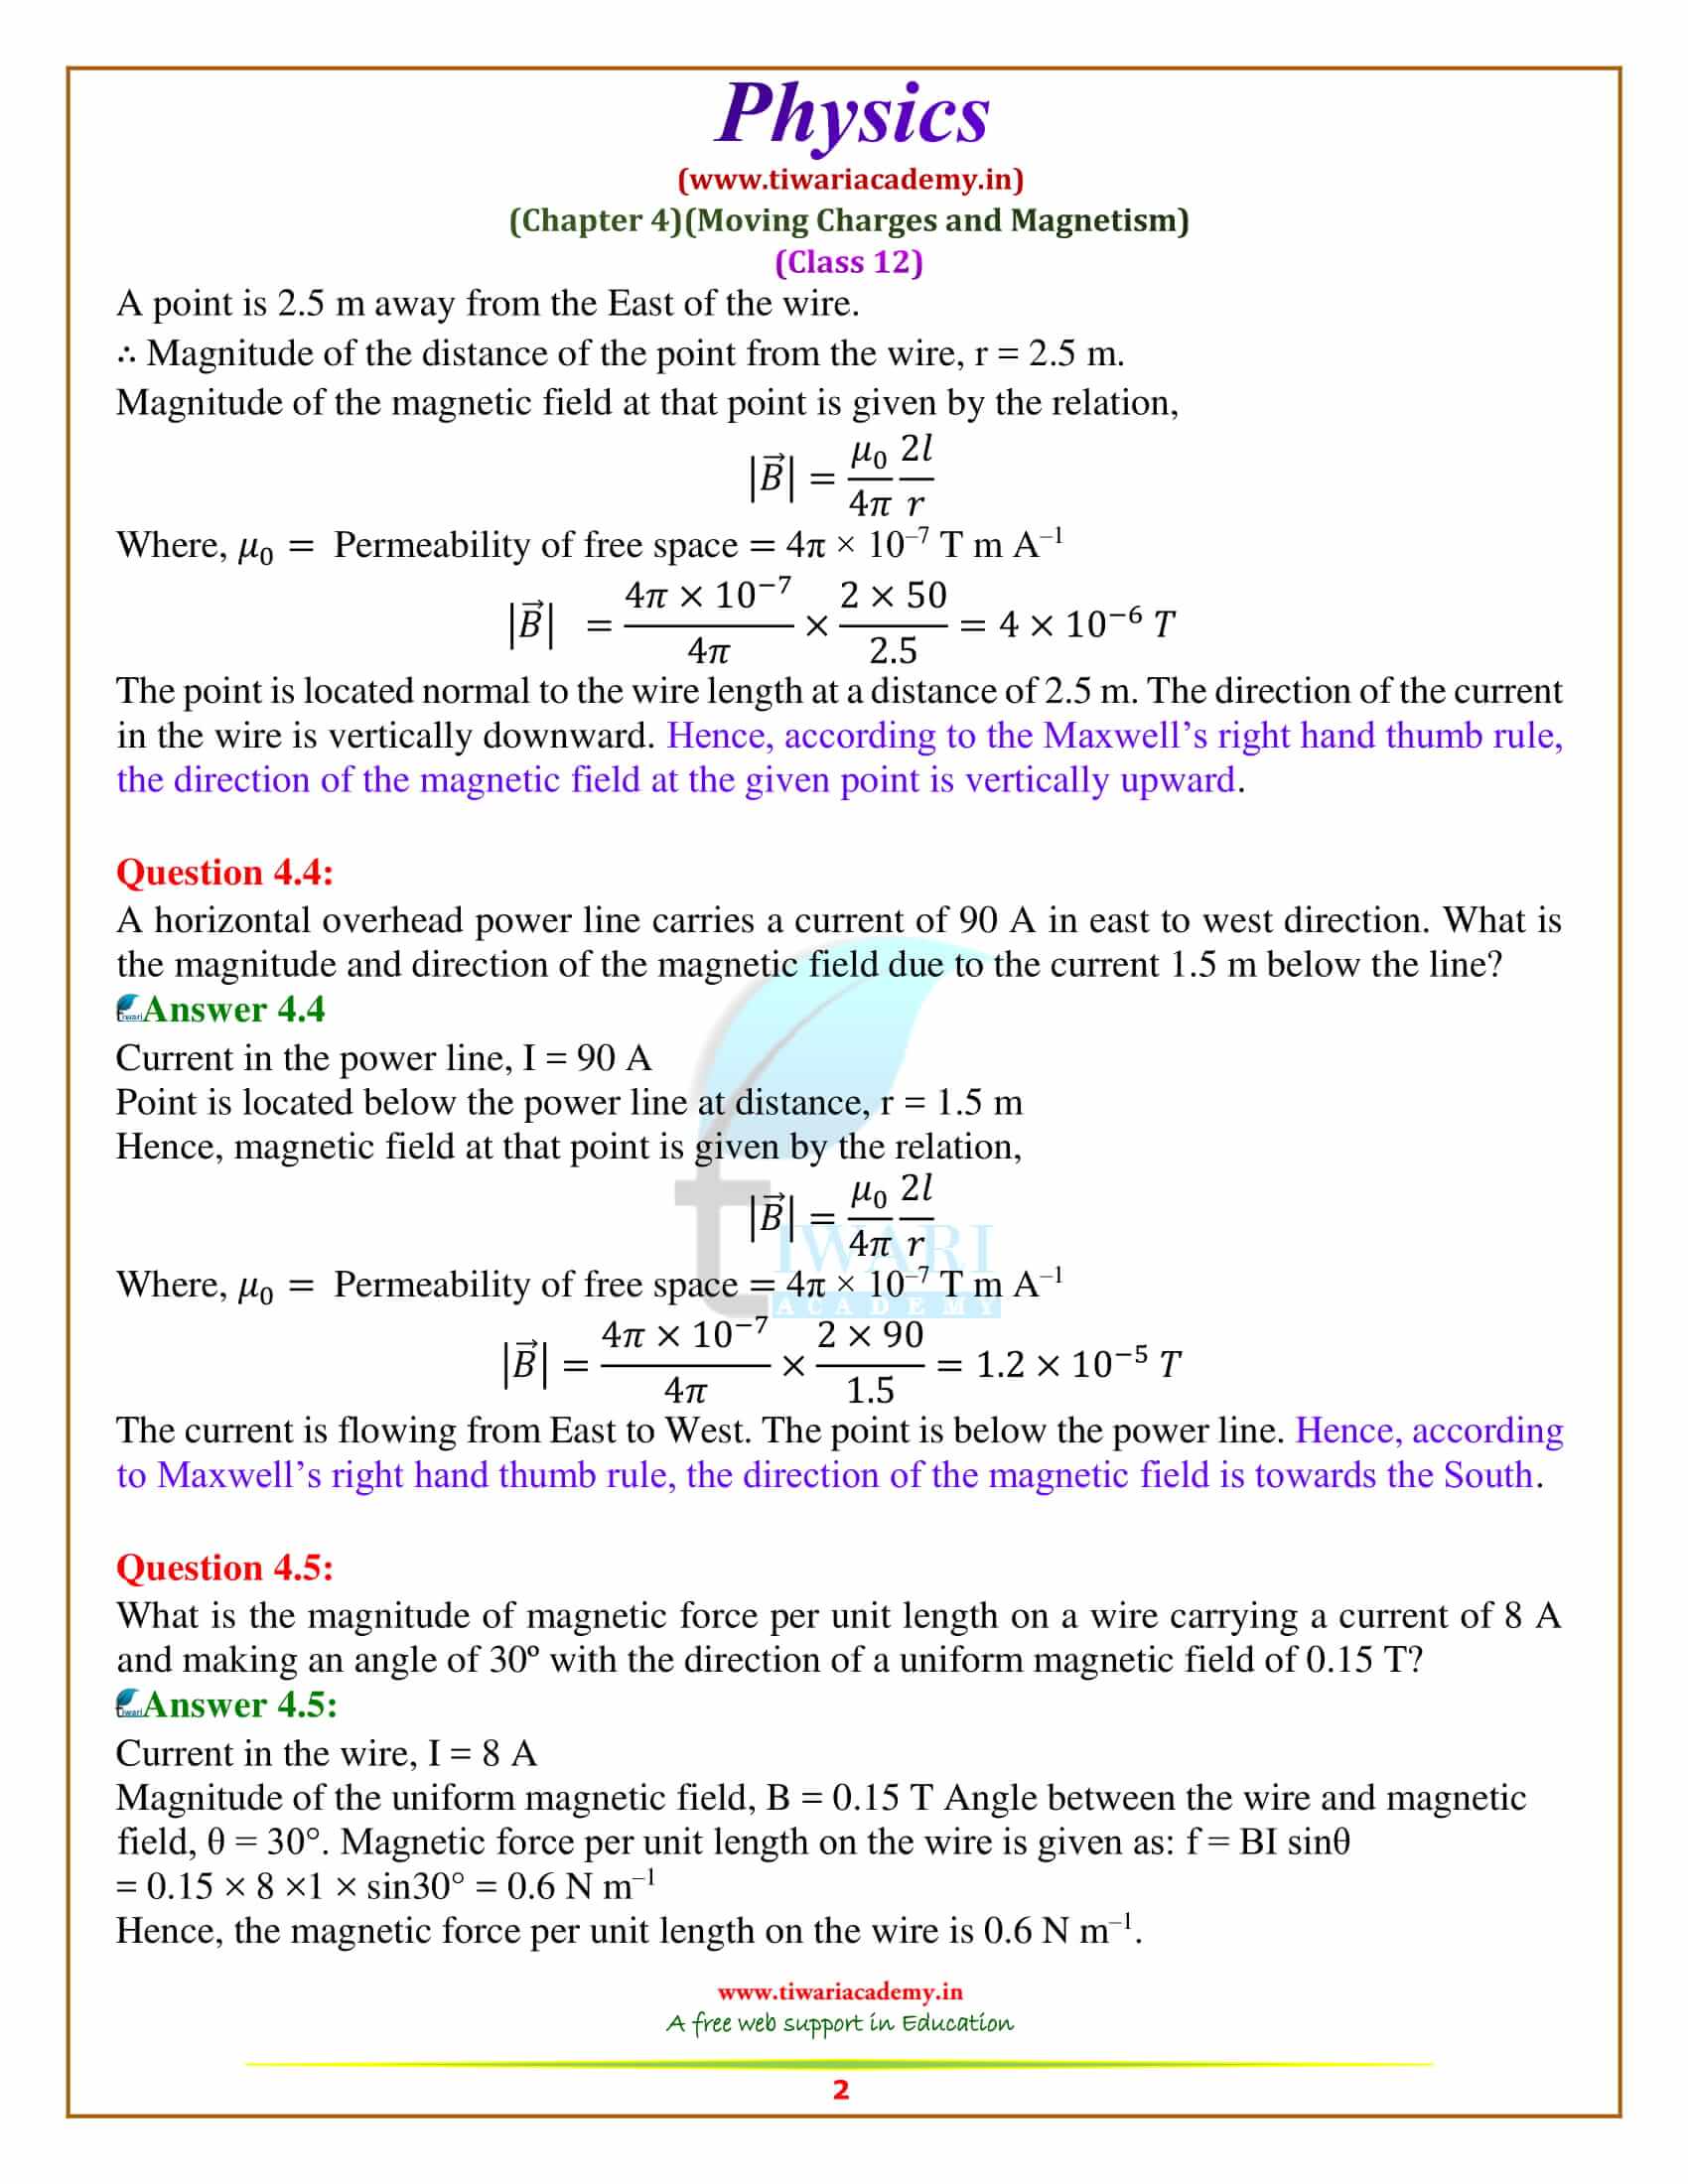 NCERT Solutions for Class 12 Physics Chapter 4 Moving Charges and Magnetism in pdf